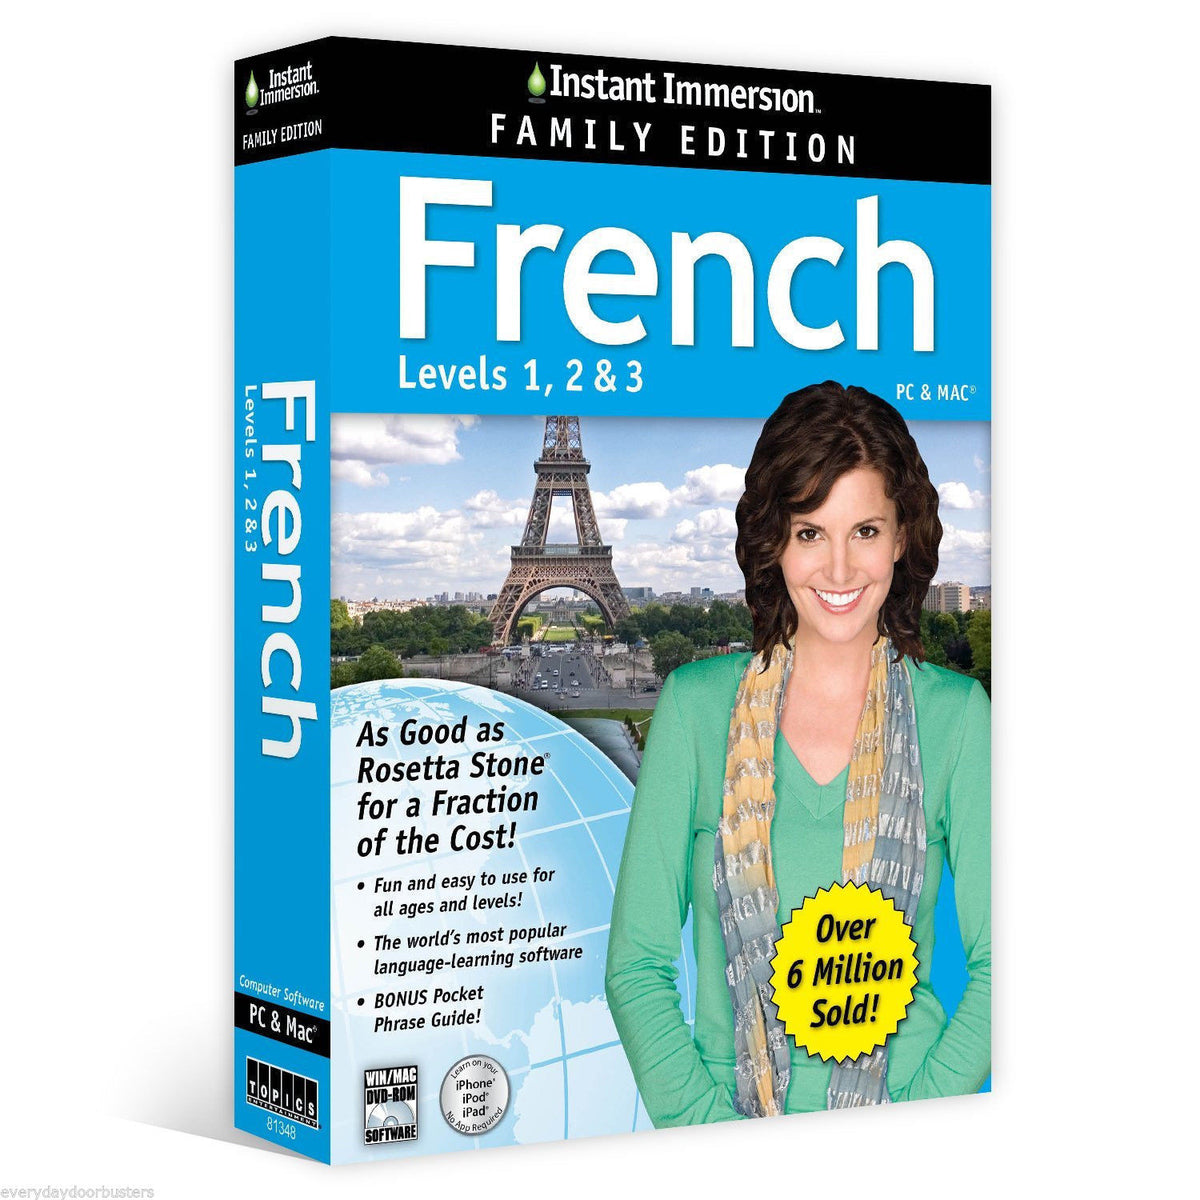 Instant Immersion French Family Edition Levels 1,2,3 - PC & MAC